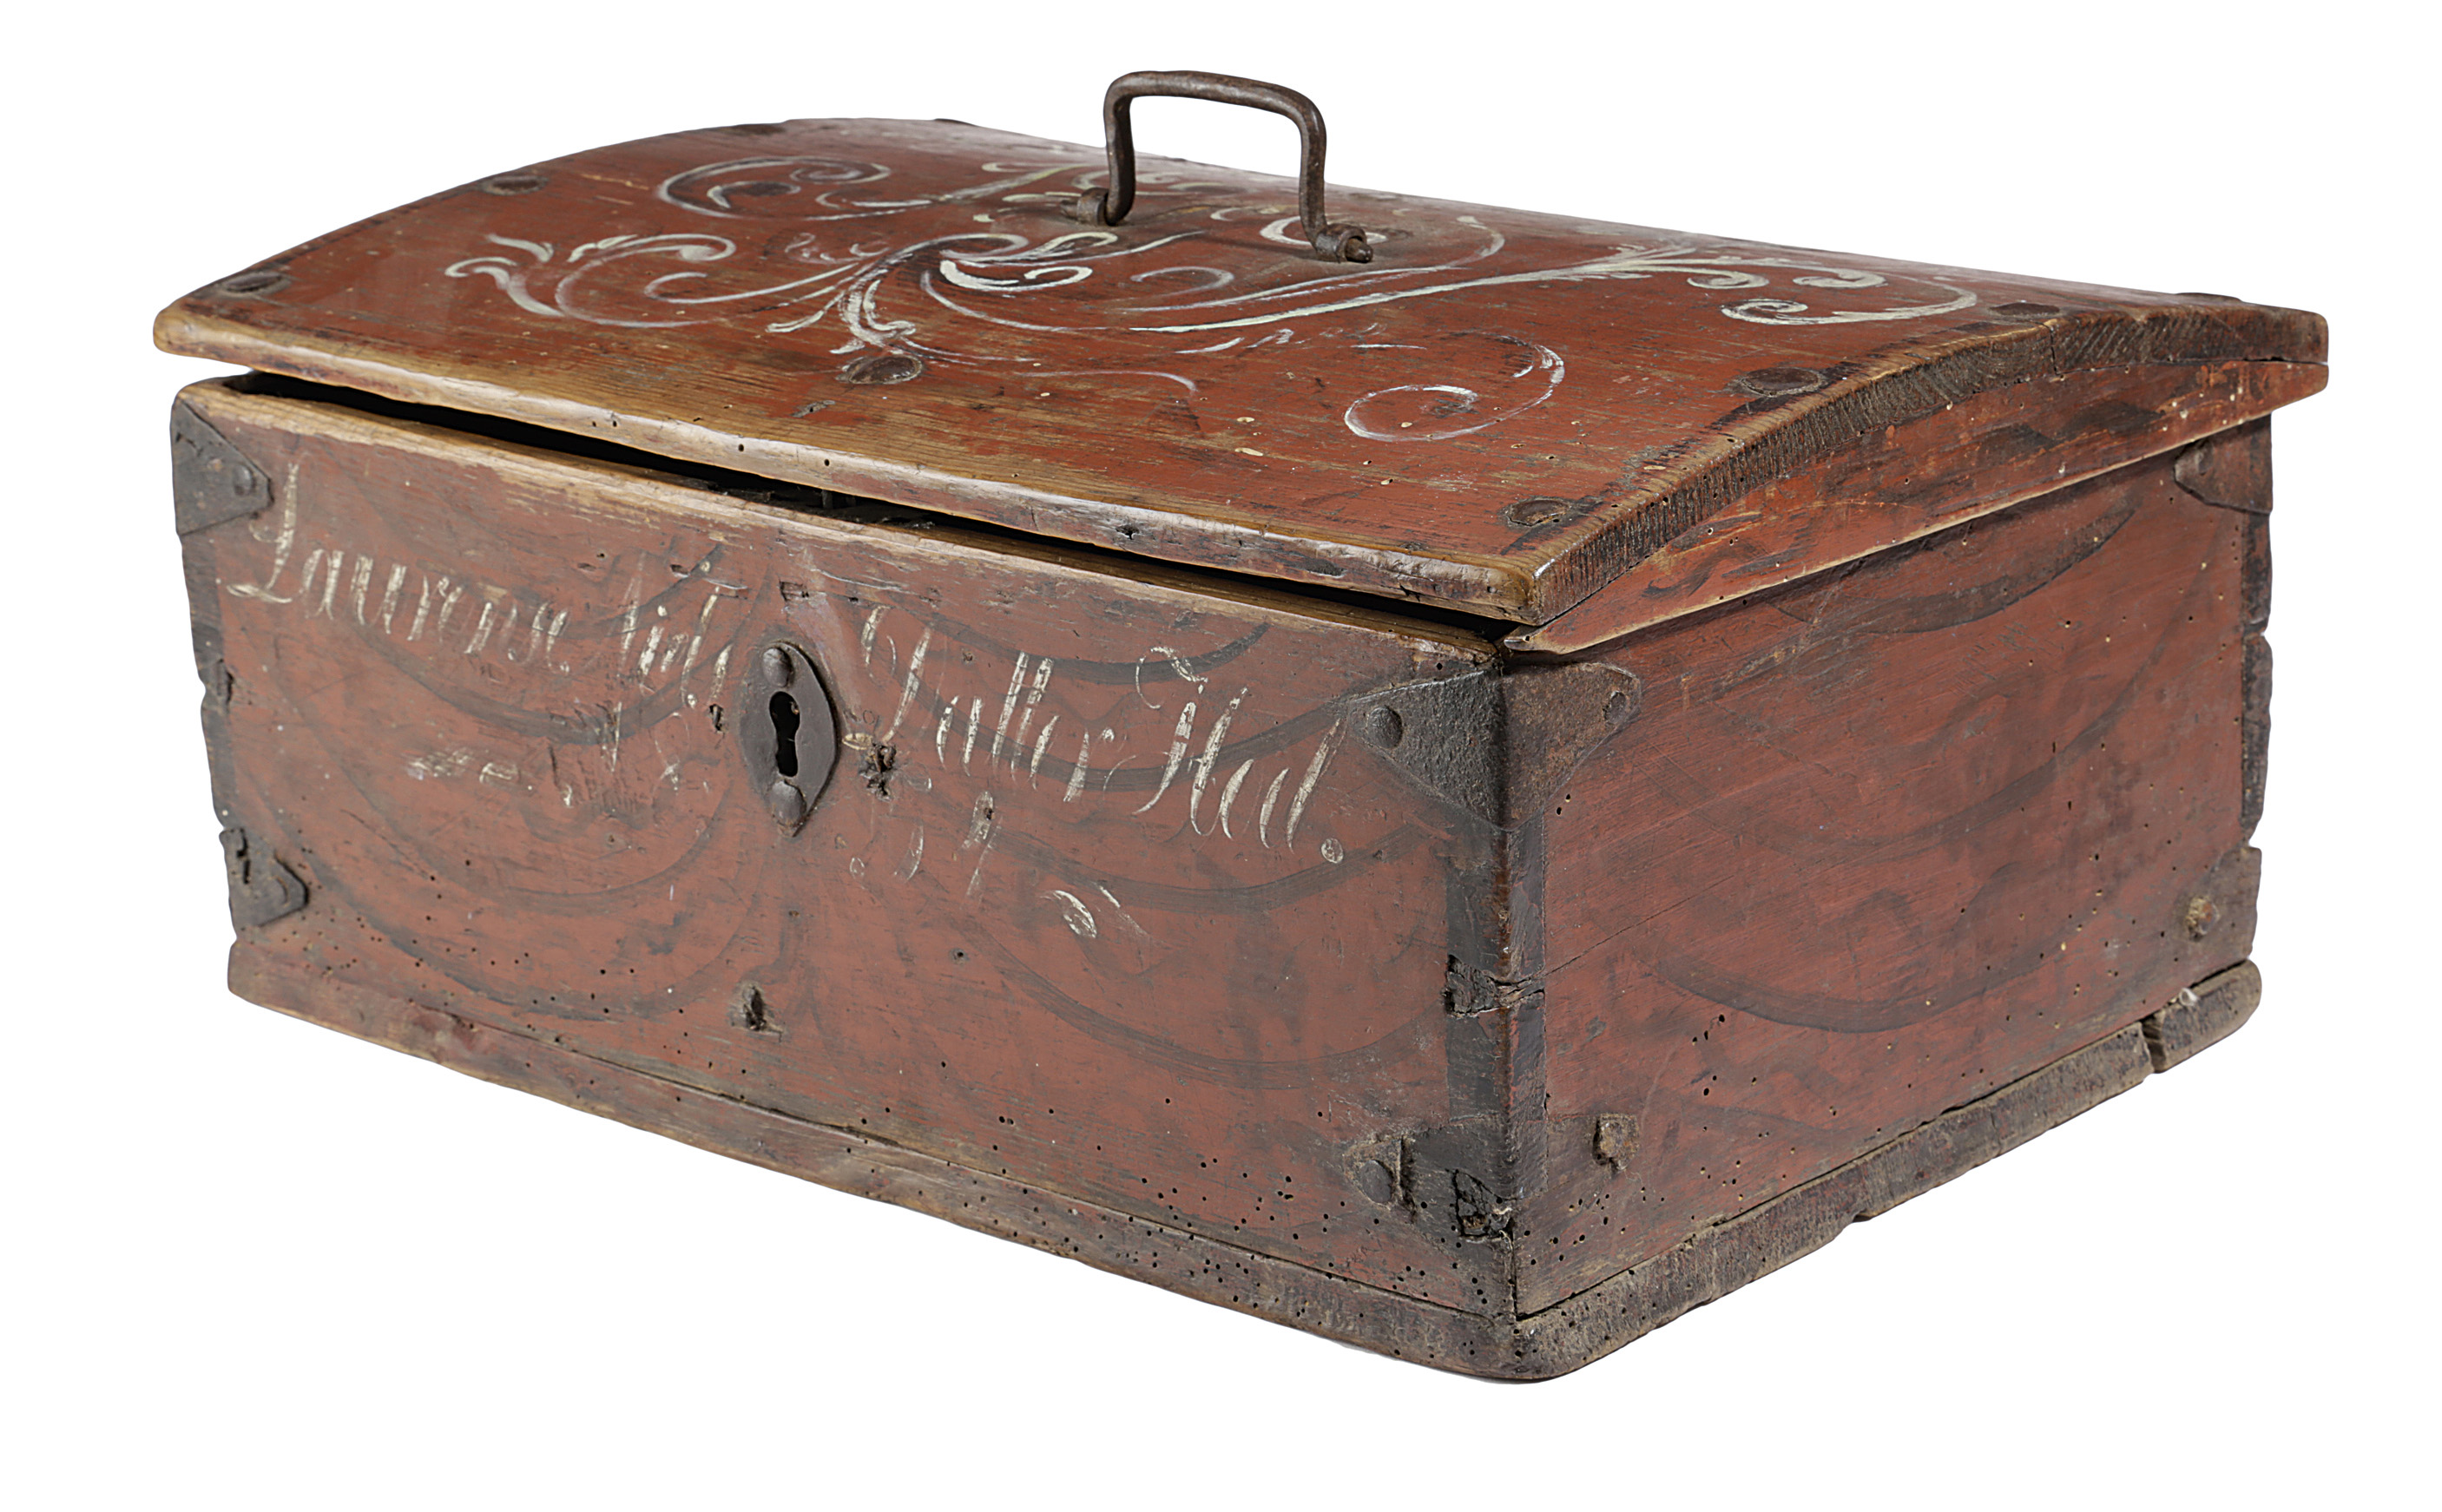 A SCANDINAVIAN FOLK ART PAINTED PINE BOX MID-19TH CENTURY decorated with scrolling leaves, the front